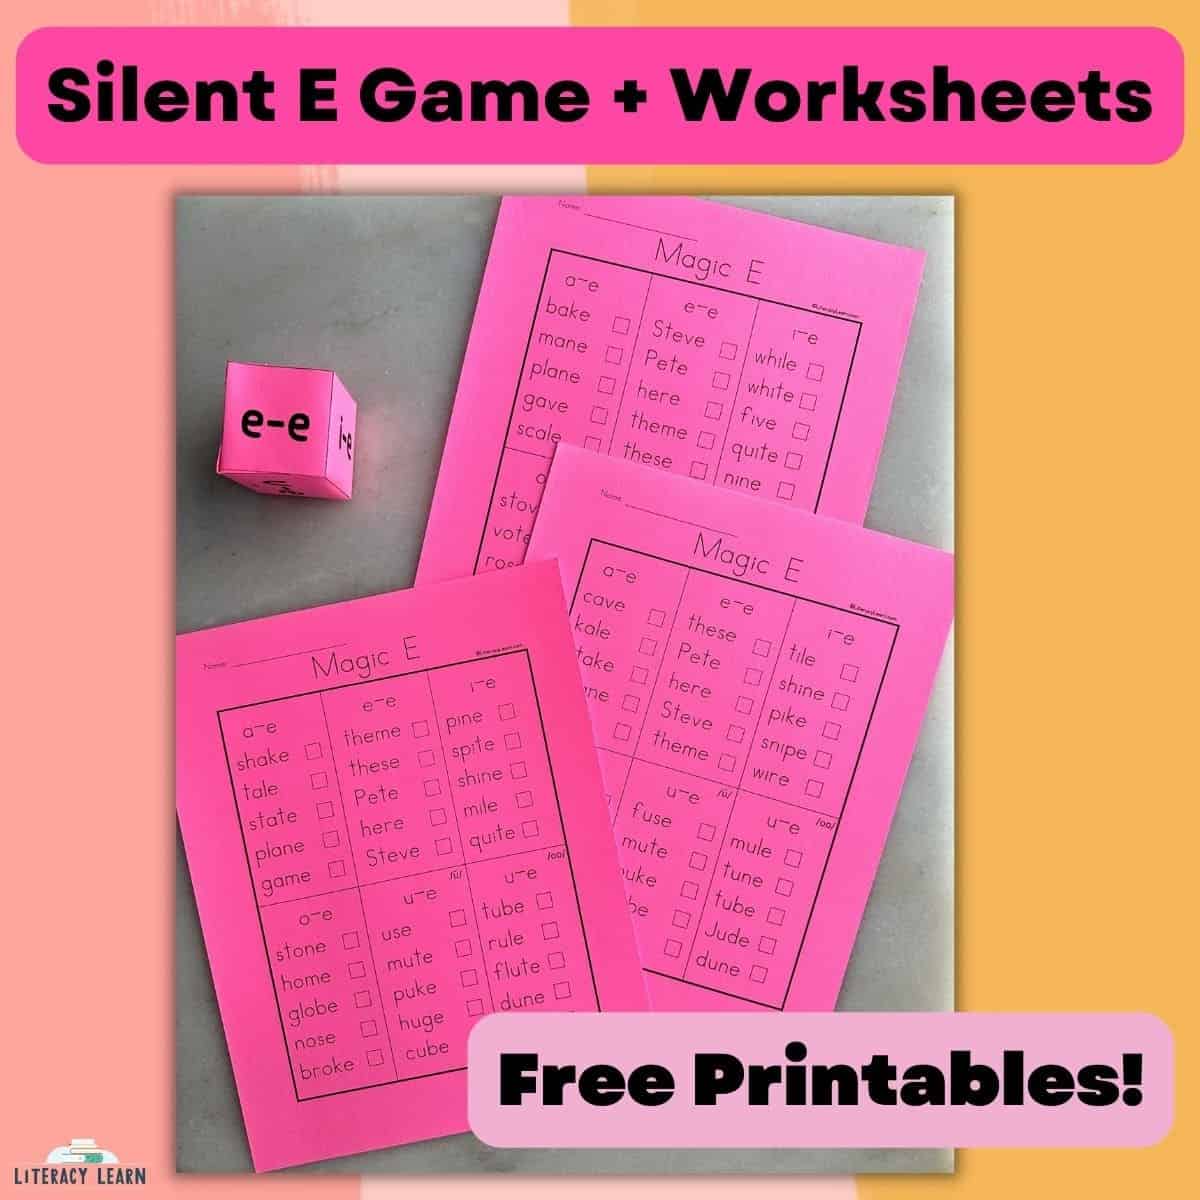 Photograph of three Magic E worksheets and phonics dice with title "Silent E Game + Worksheets.